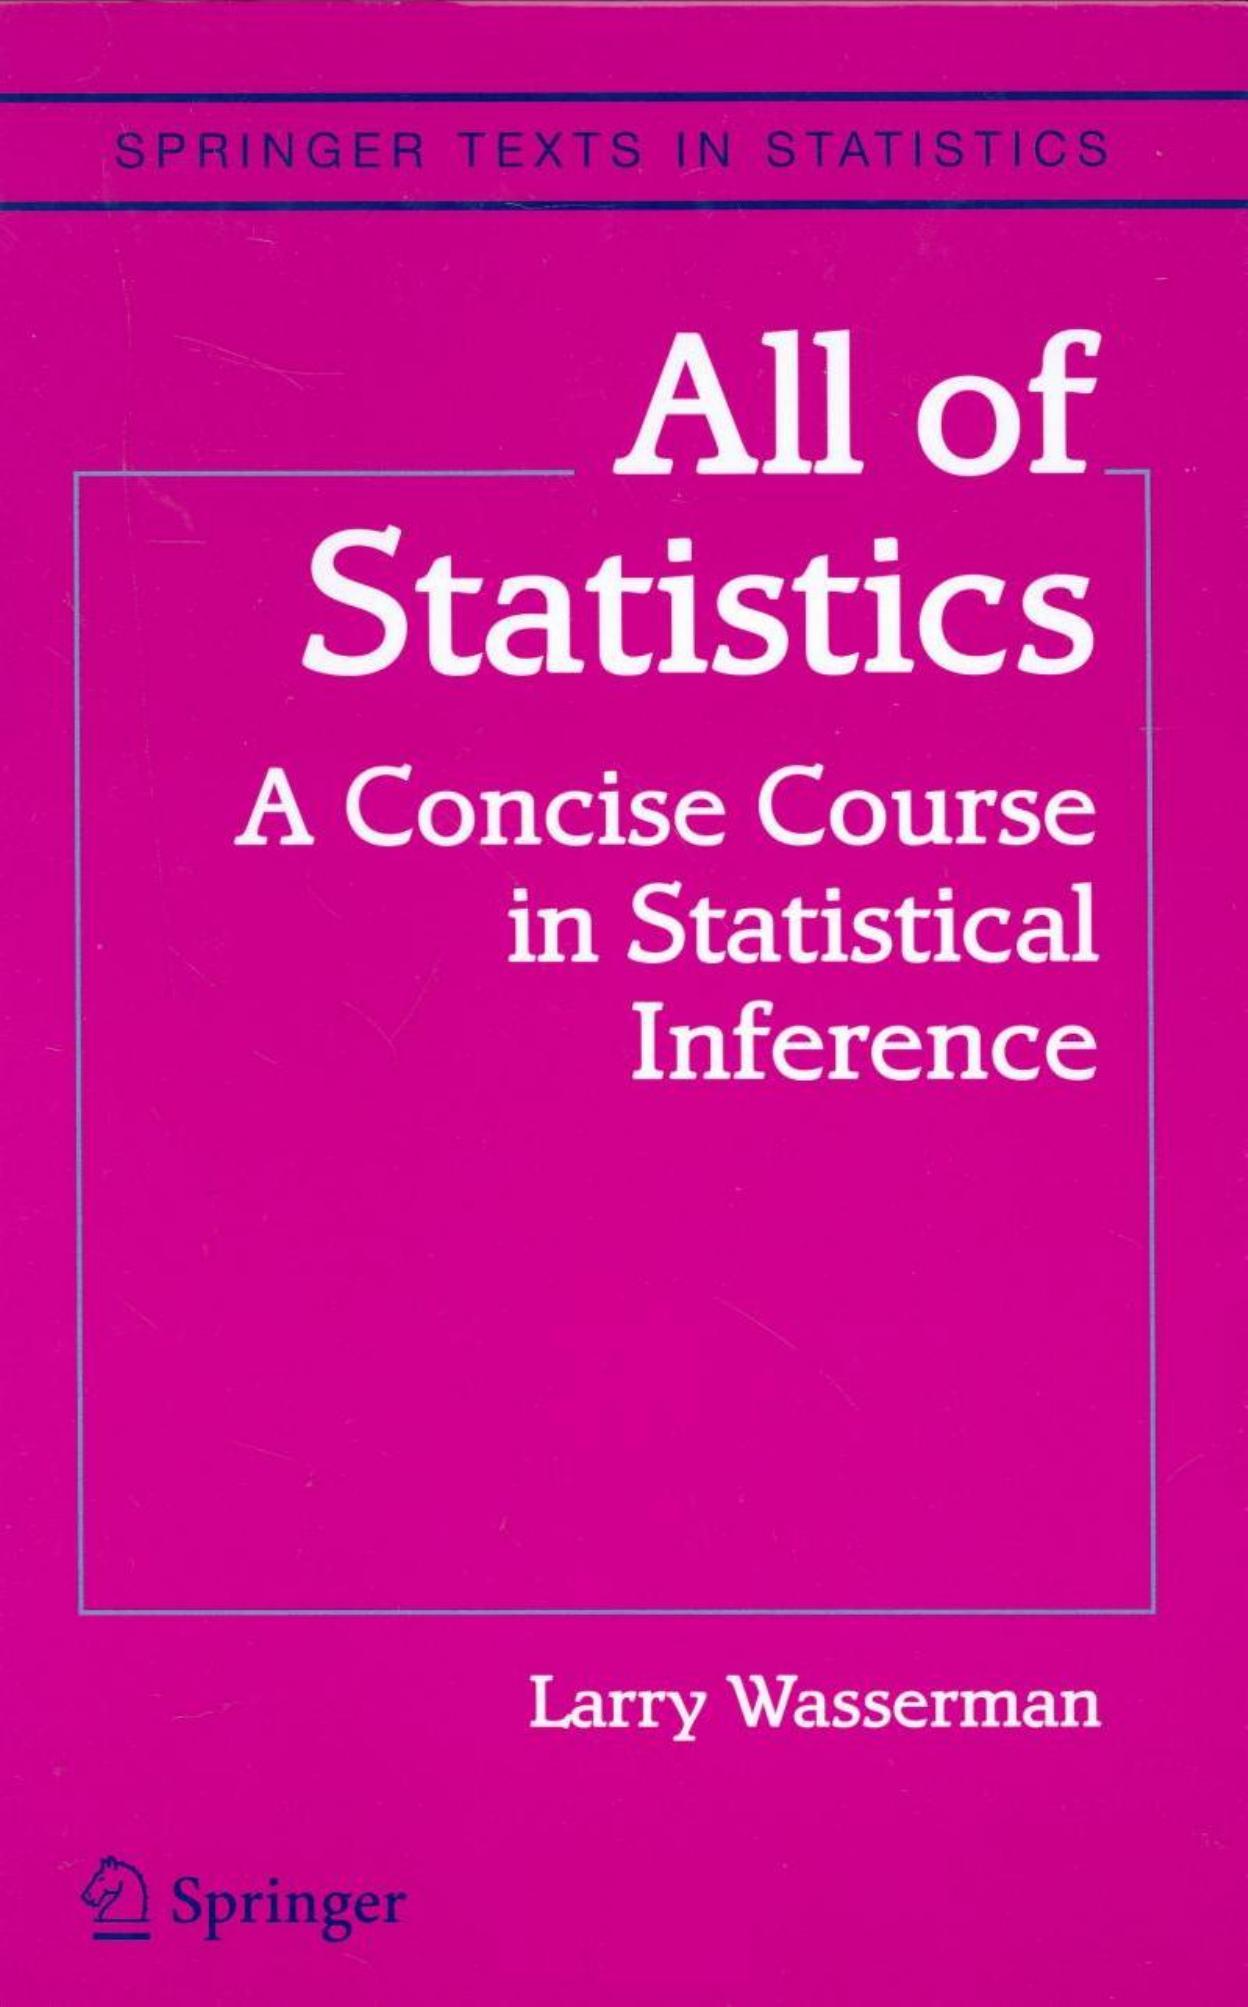 All of Statistics: A Concise Course in Statistical Inference (Springer Texts in Statistics)